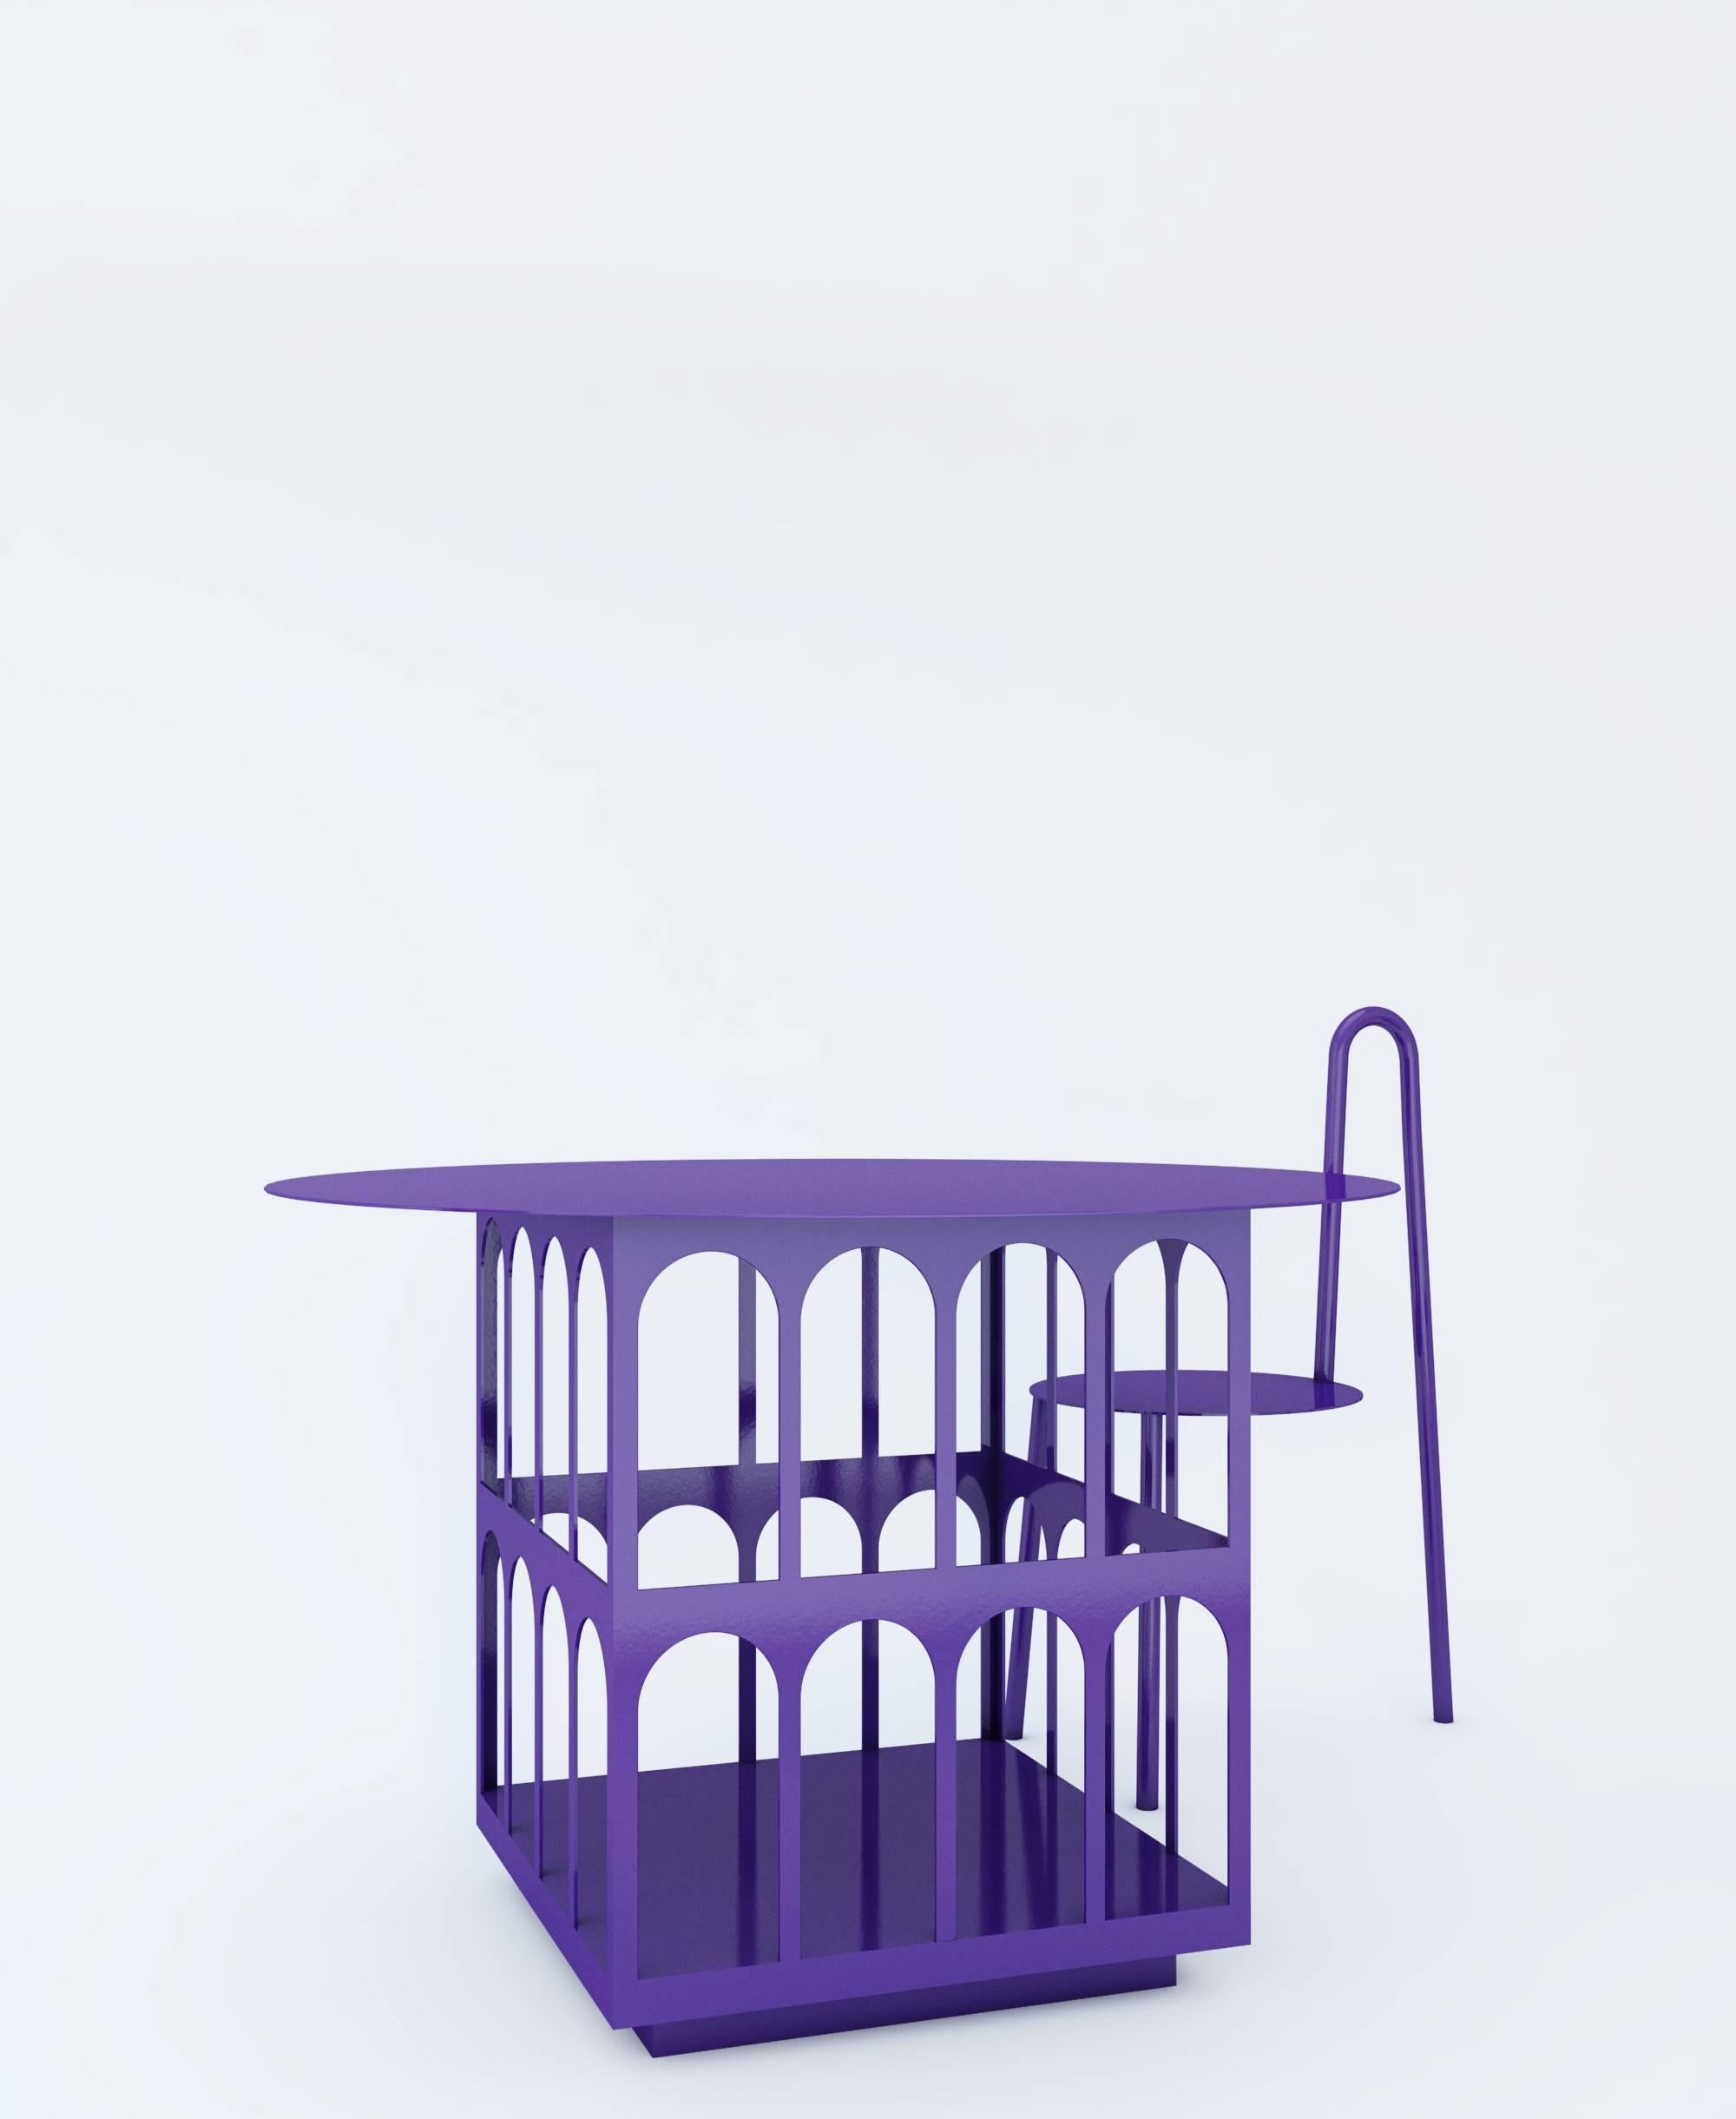 Contemporary Chair by Crosby Studios, Metal with Purple Powder Coating, 2018 For Sale 2